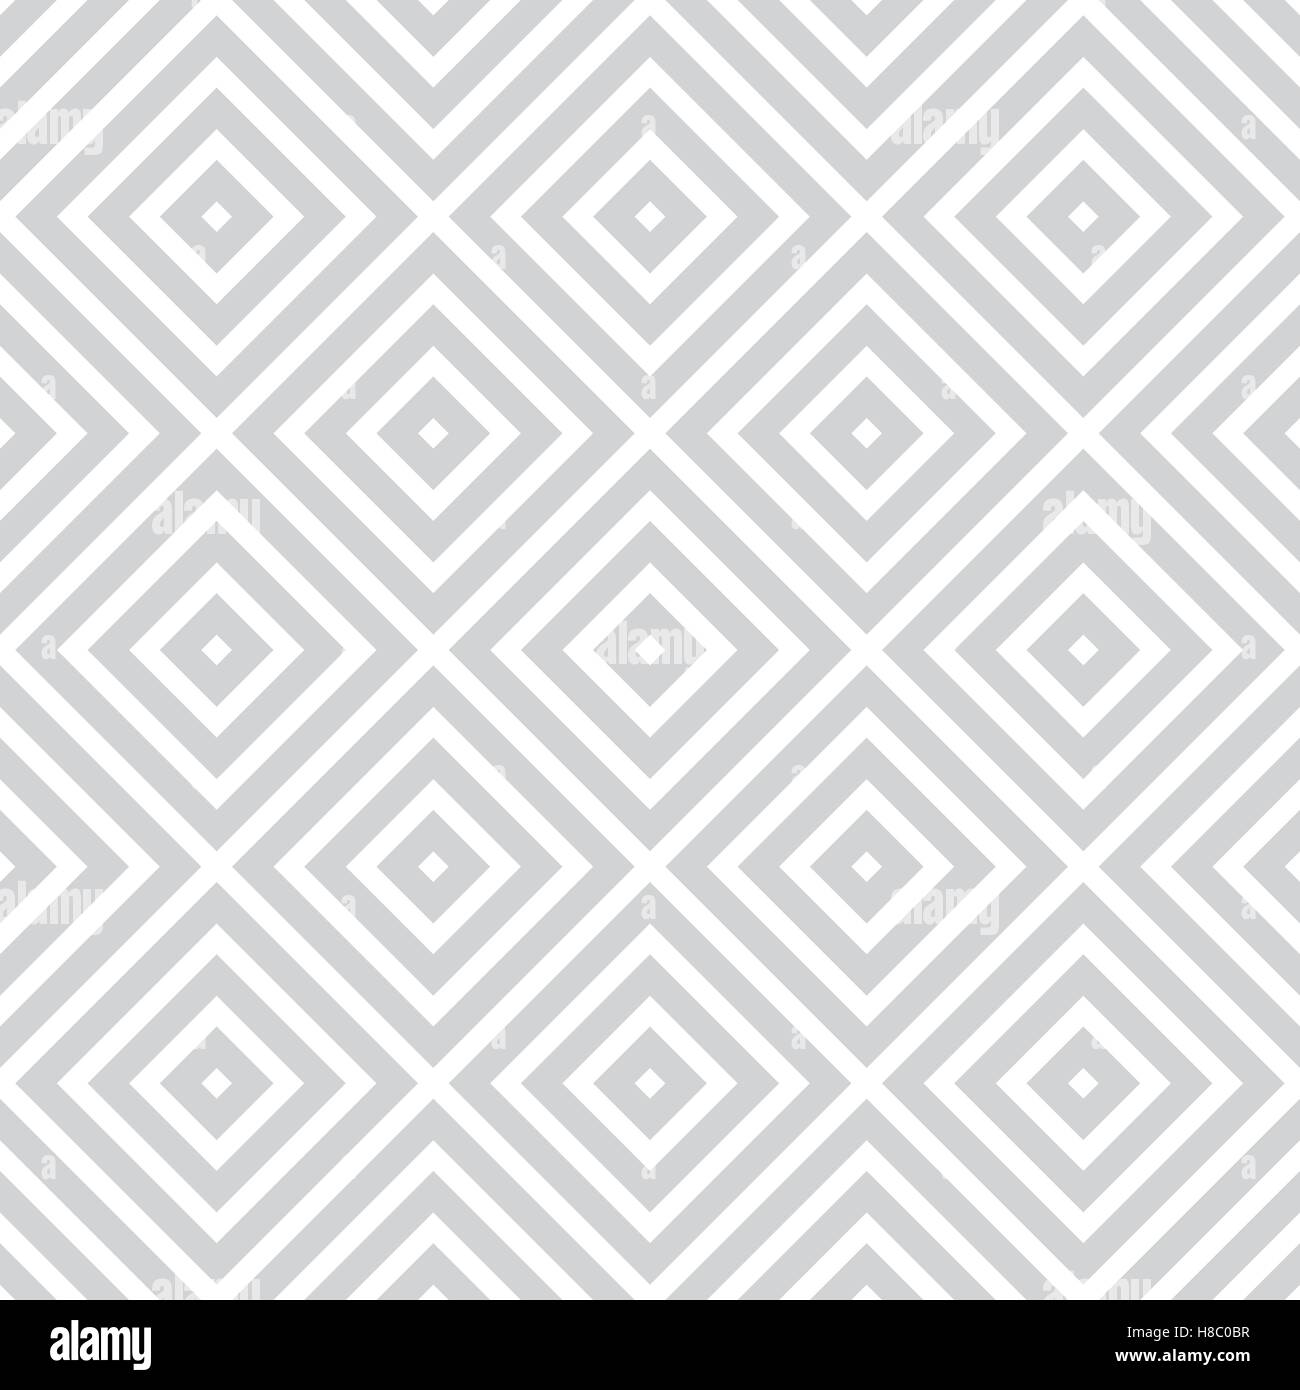 Geometric seamless pattern with repeating diamonds Stock Vector